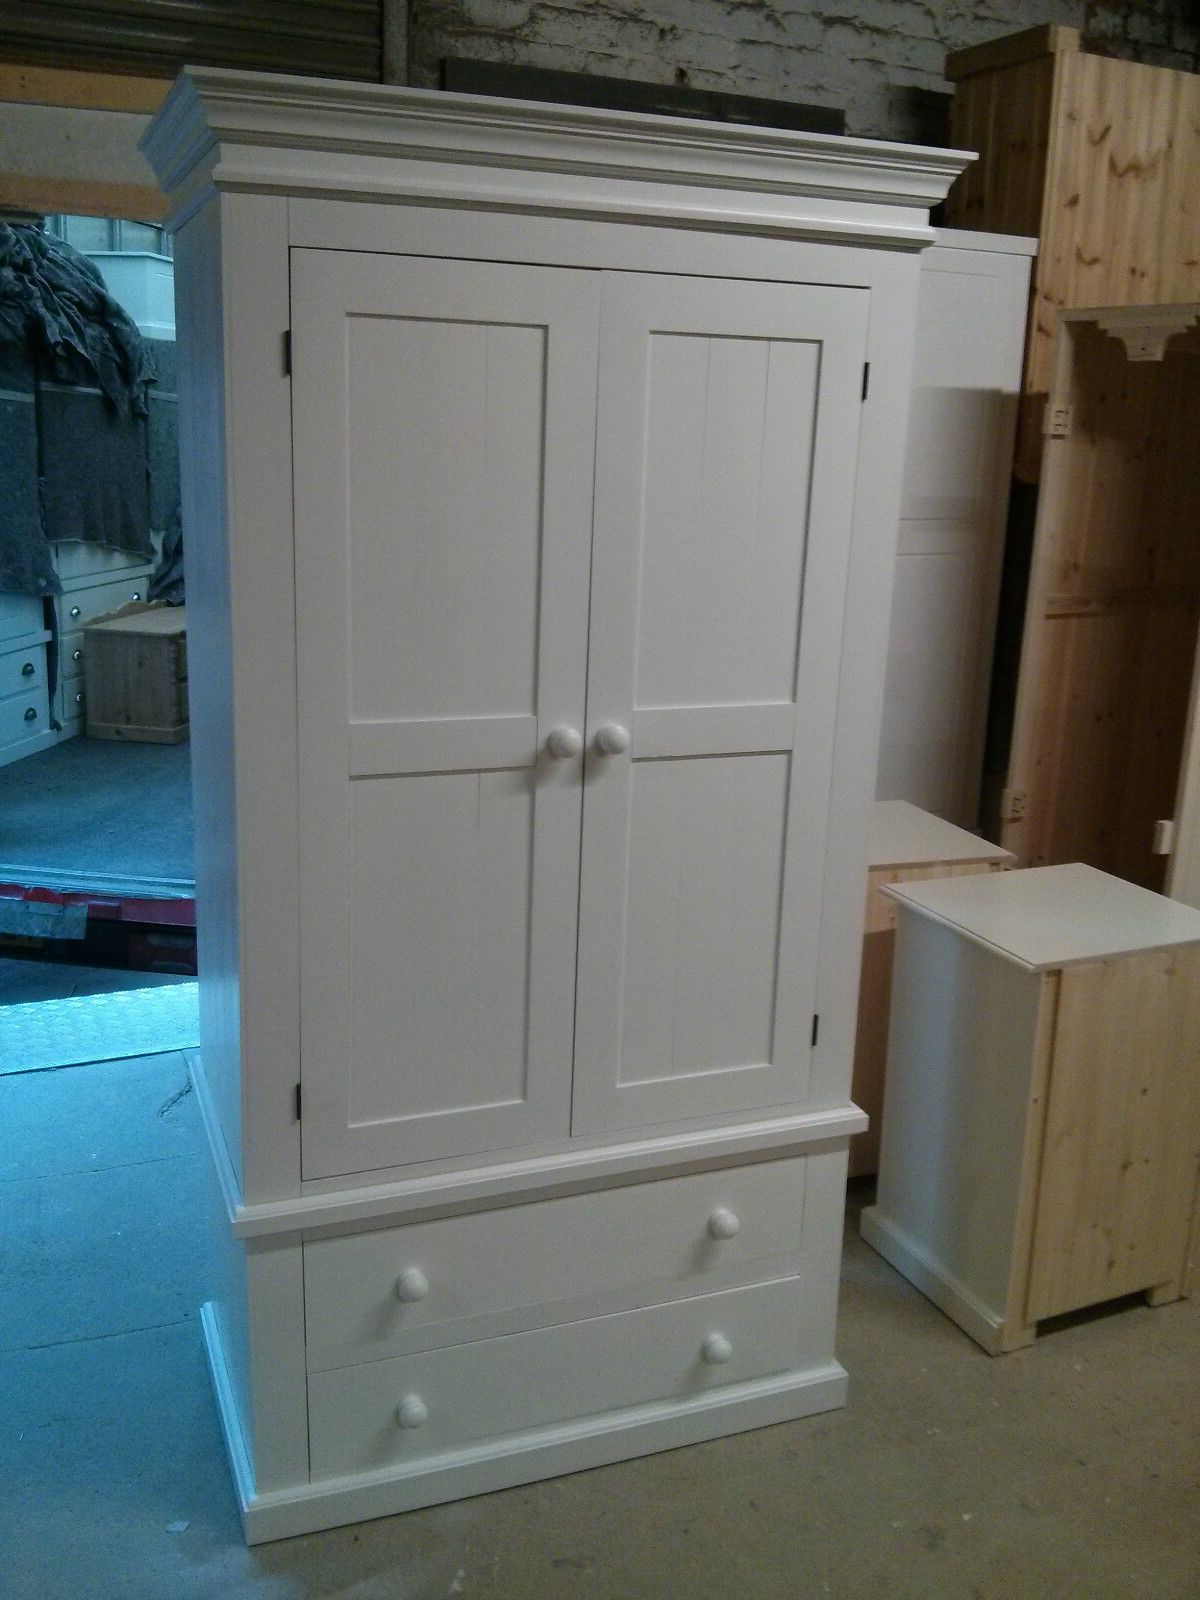 Pine Victorian Gents 2 Drawer Wardrobe Painted White Shabby Chic | Ebay With Regard To Shabby Chic Pine Wardrobes (View 2 of 20)